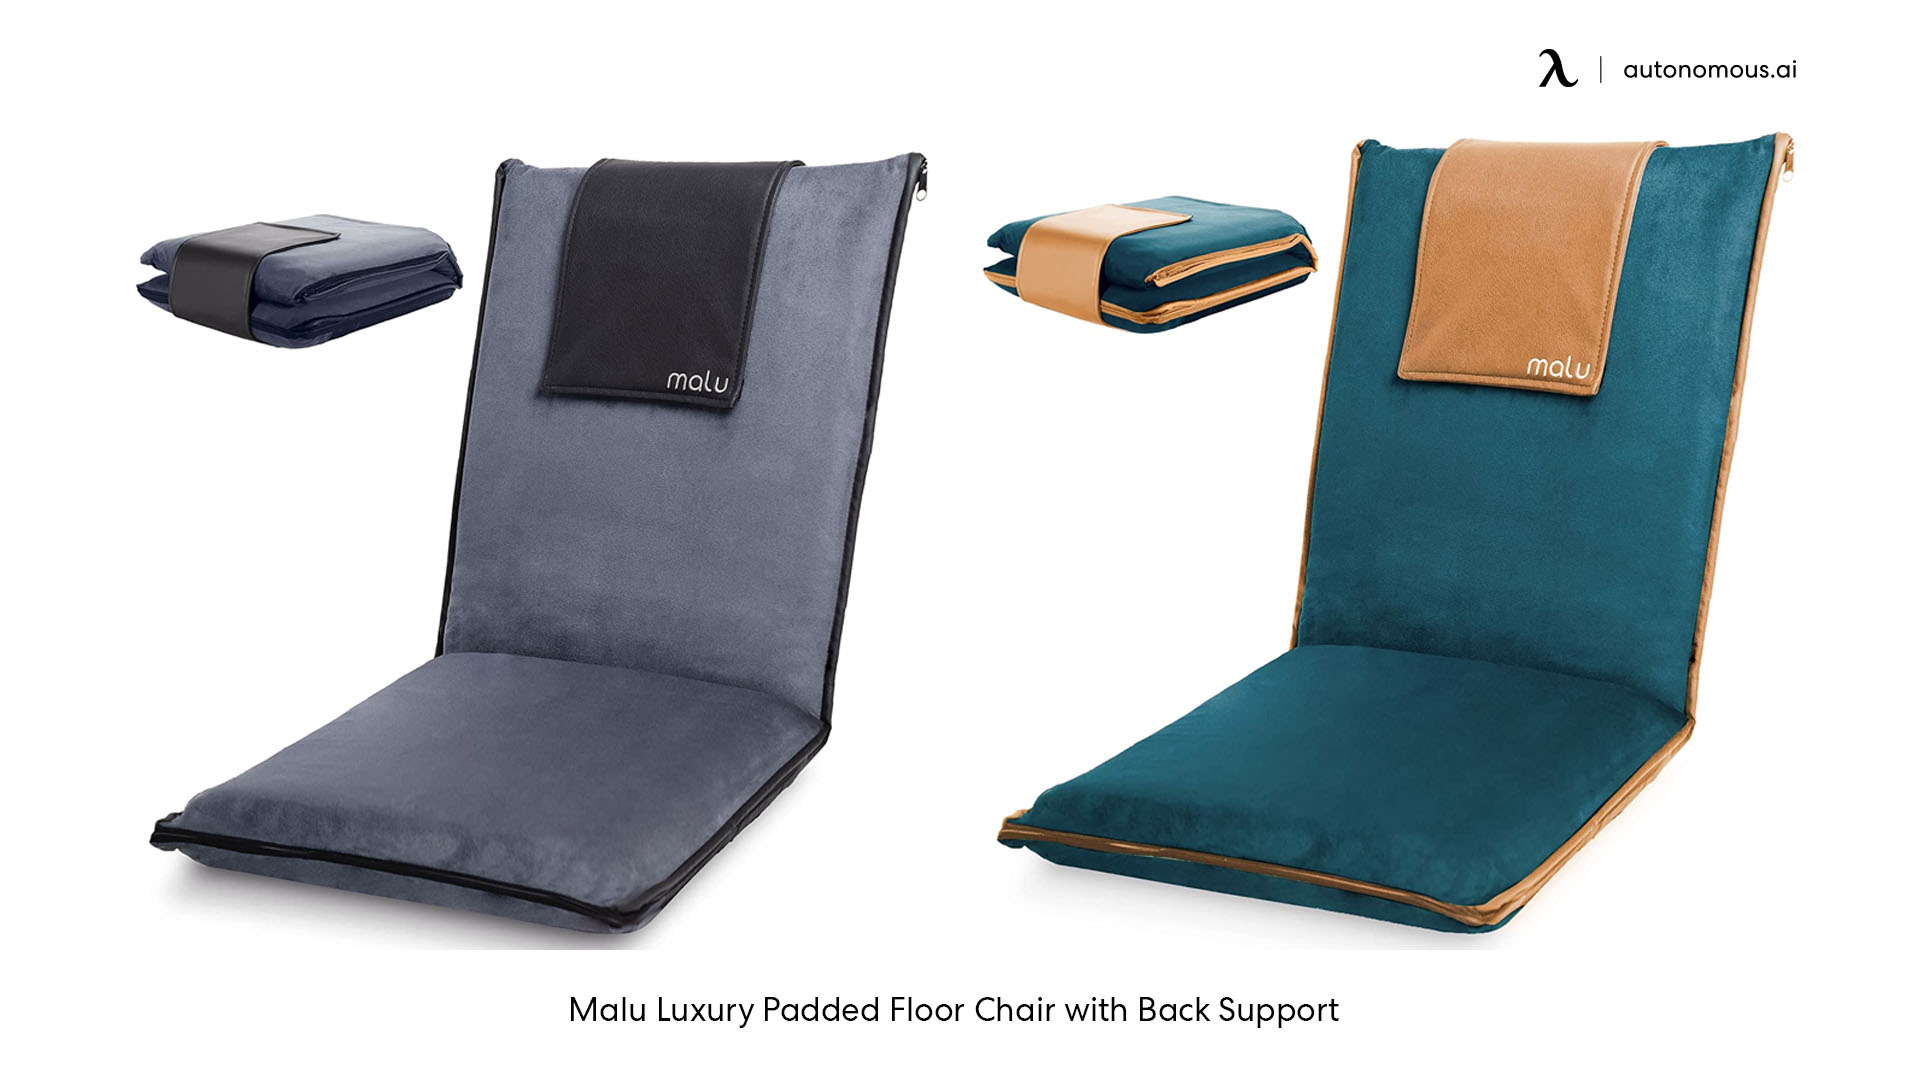 Malu Luxury Padded Floor Chair with Back Support